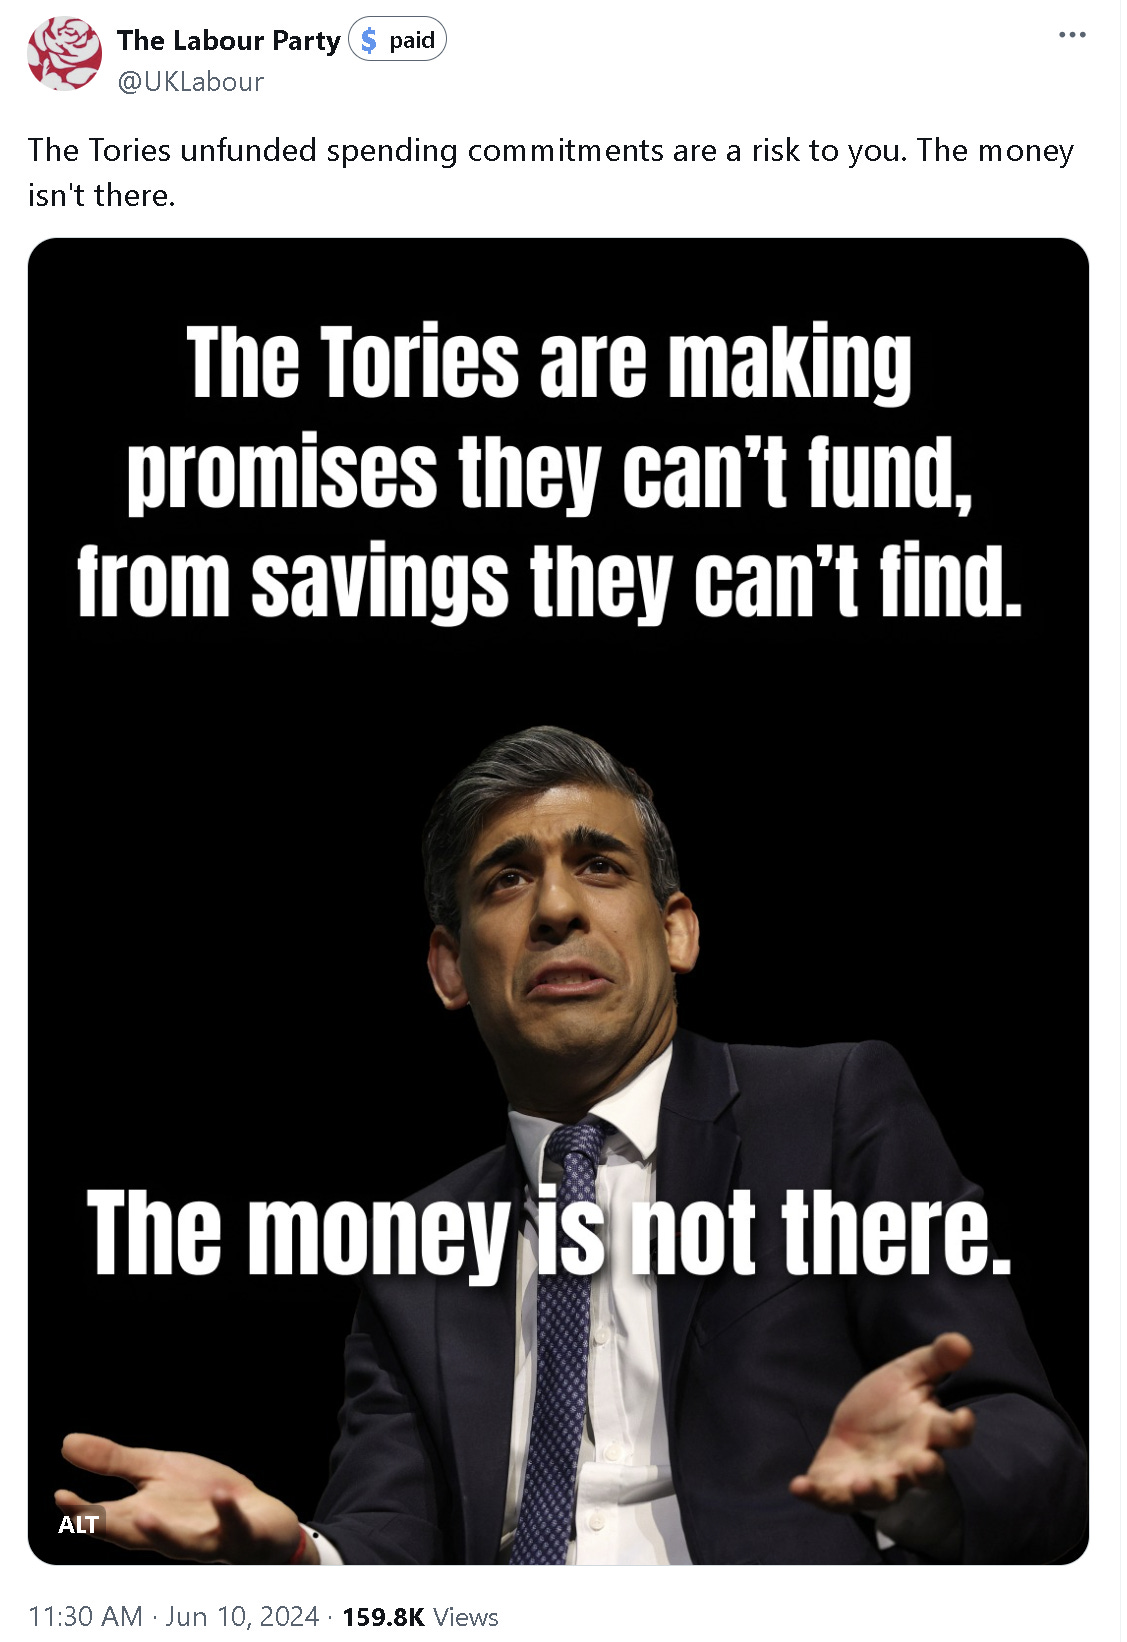 An official Labour party tweet, with words superimposed over an image of Rishi Sunak, which read: "The Tories are making promises they can’t fund, from savings they can’t find. The money is not there."